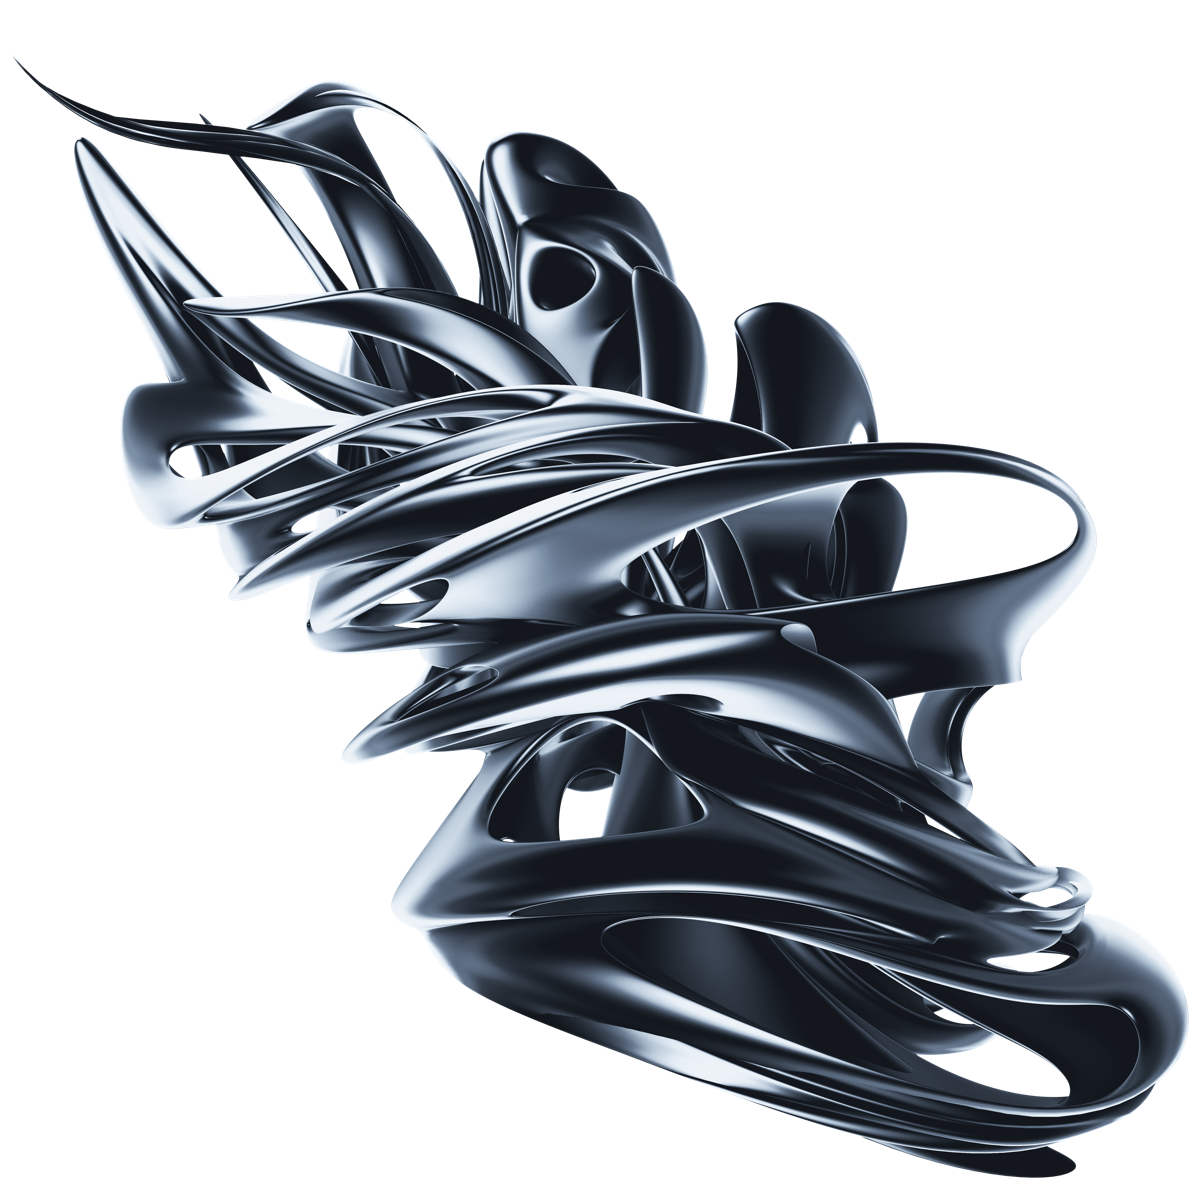 Skew Warped 3d Shapes In Abstract Stock Art By Chroma